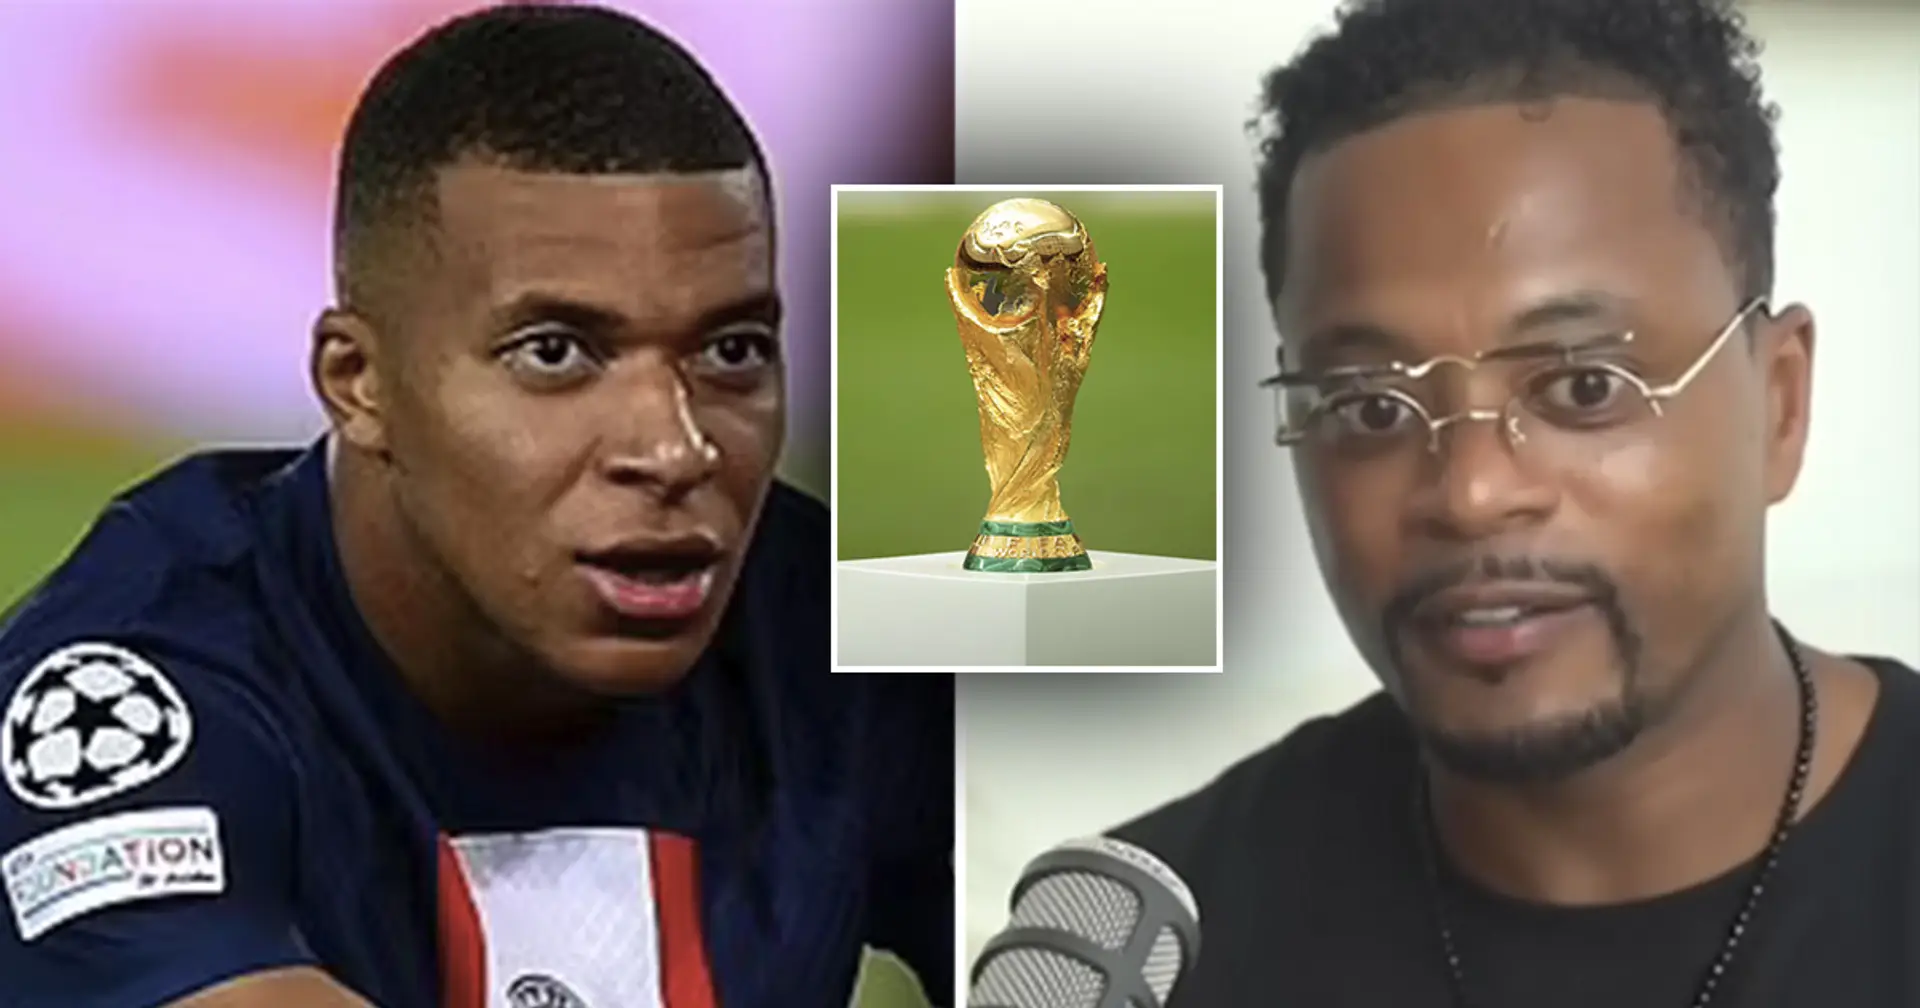 'He's doing more than Mbappe': Evra names Barca player as one of the best at World Cup